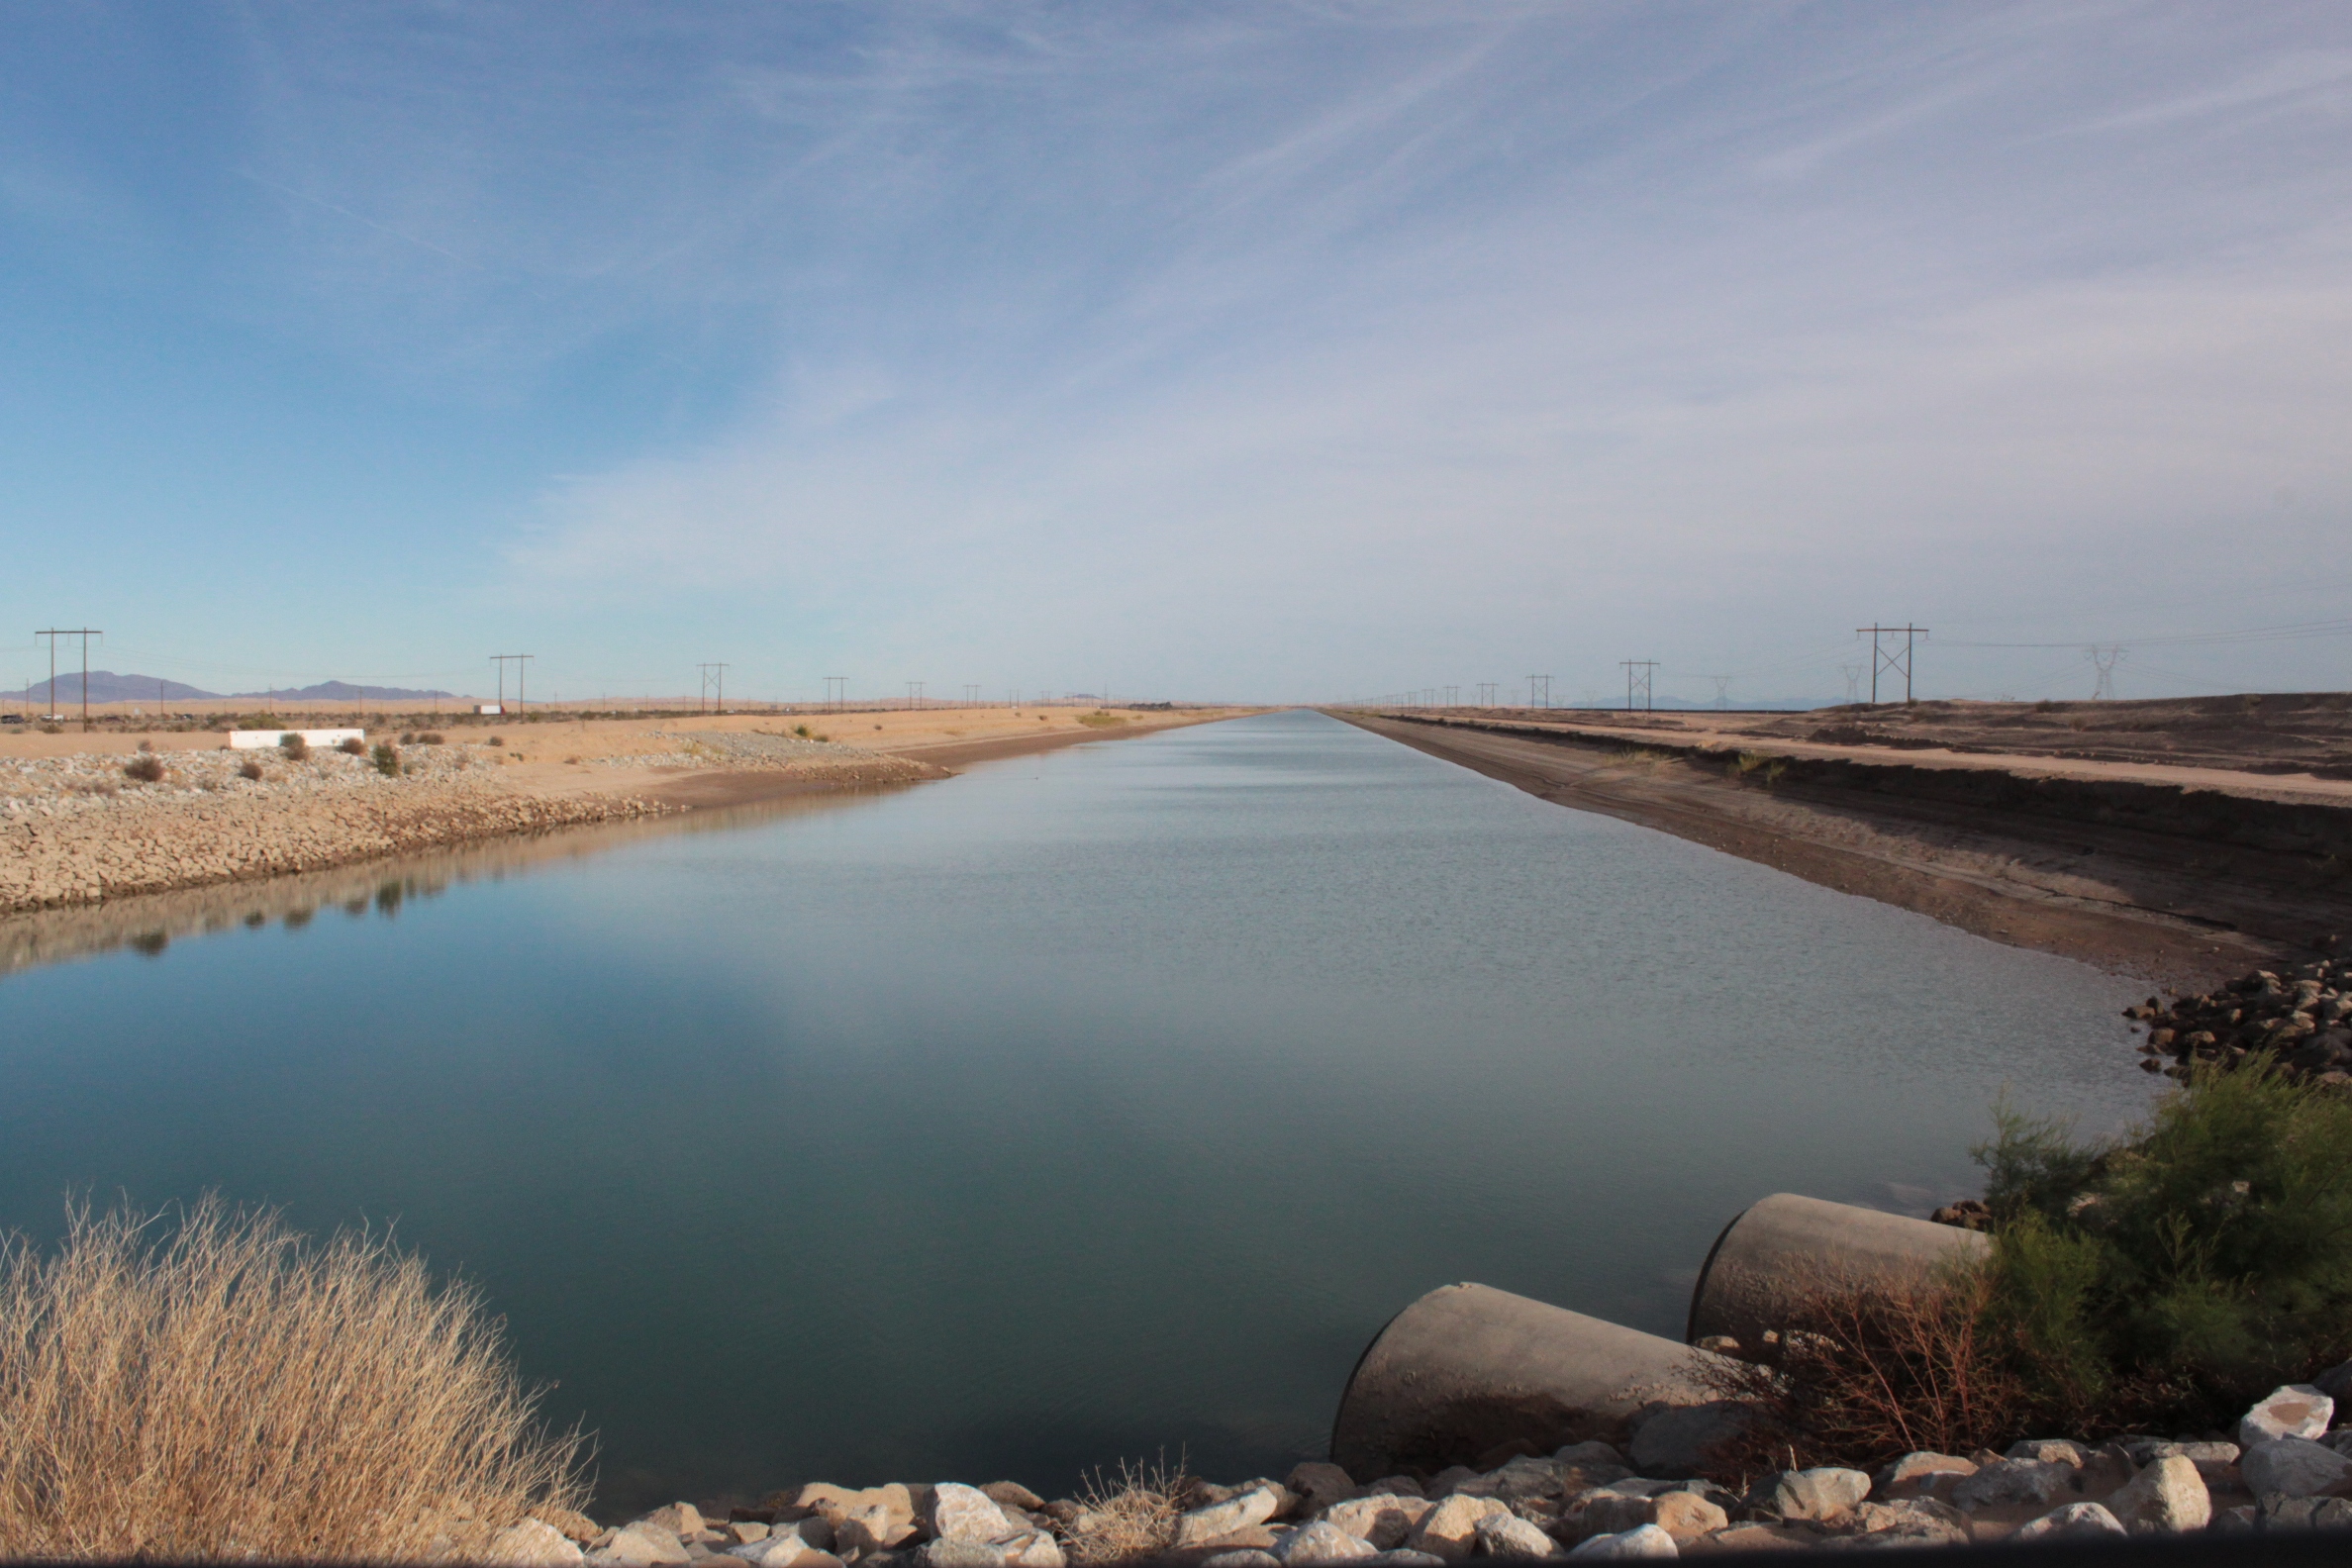 The All-American Canal | Maven's Photoblog